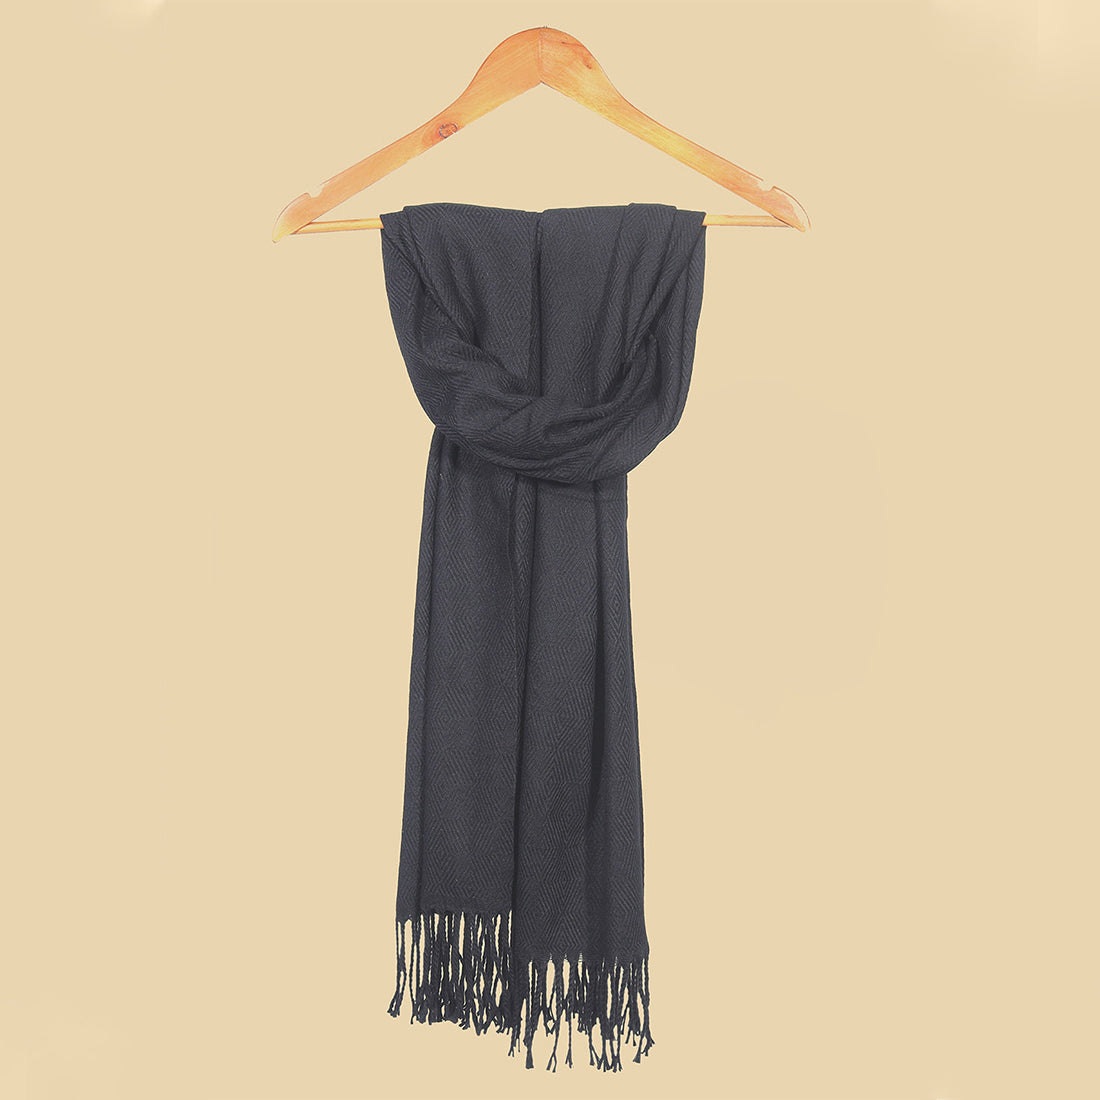 Black Acrylic Winter Scarf with Long Fringes